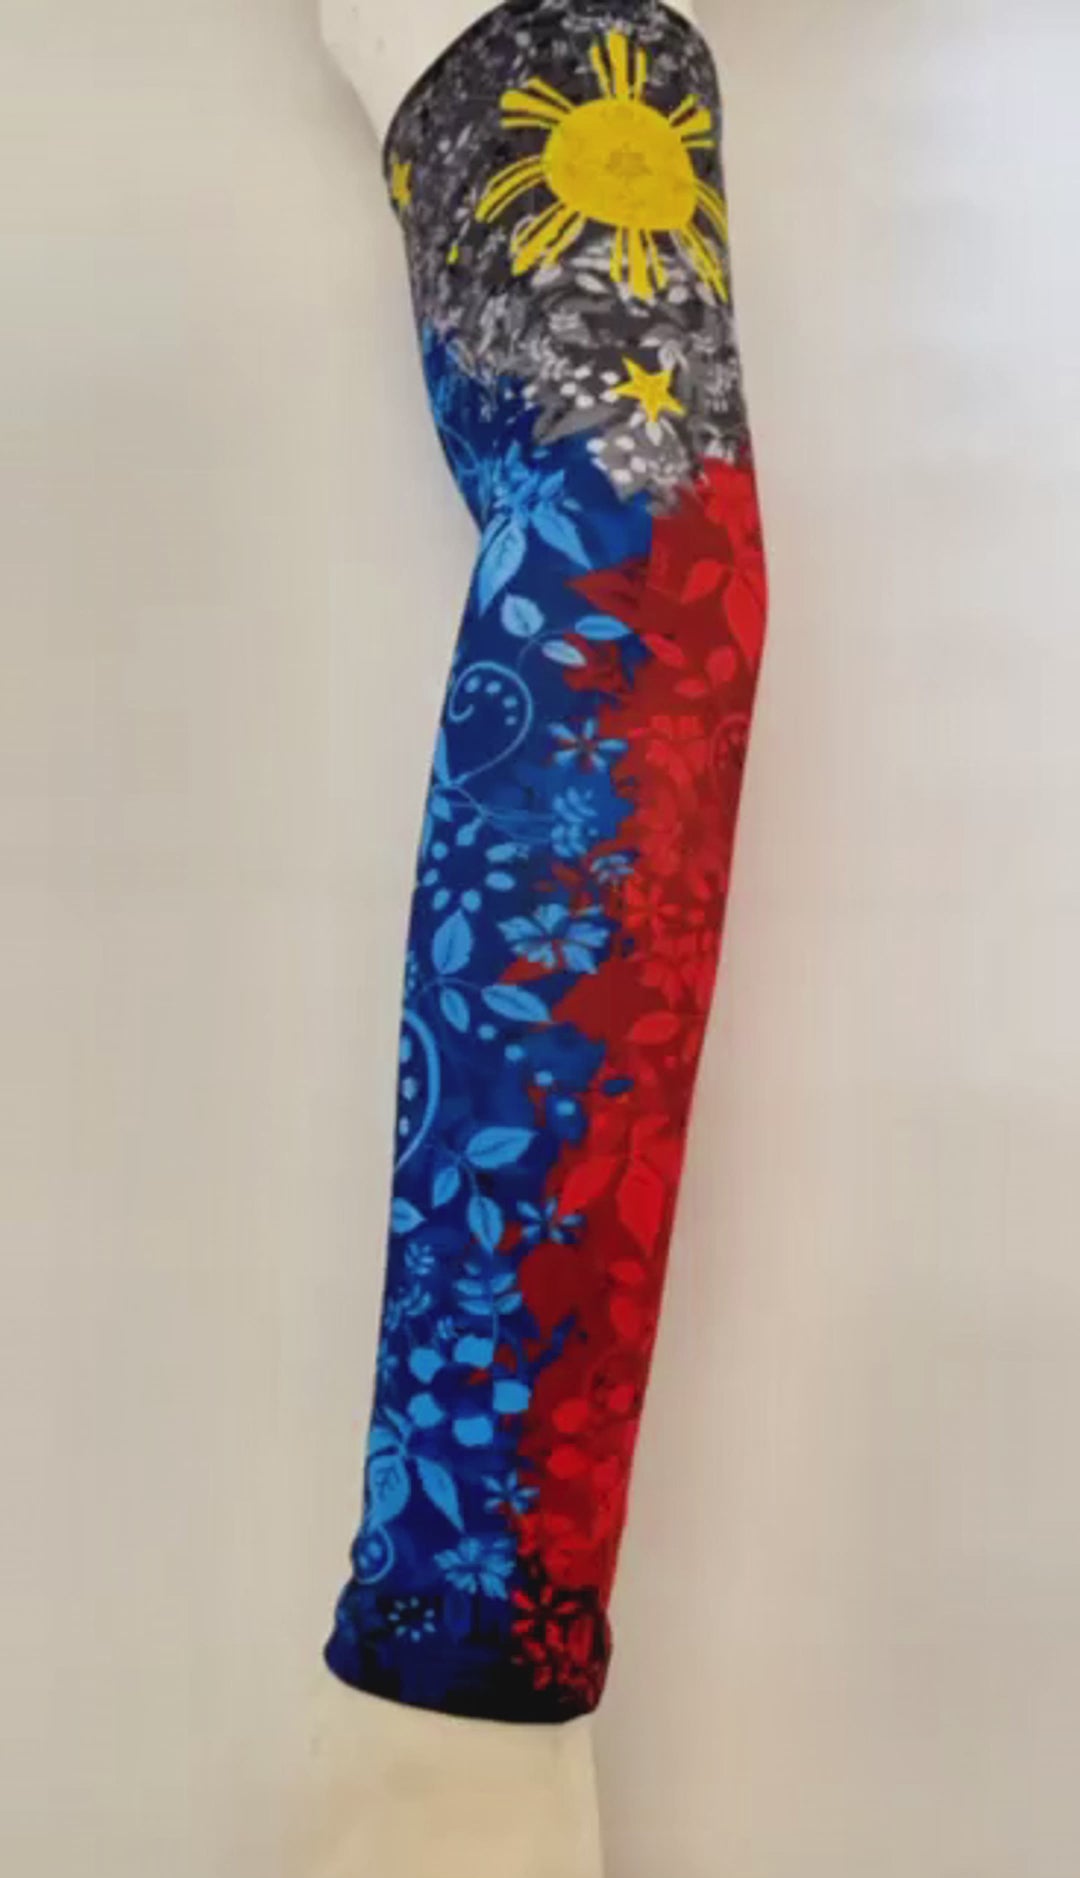 Philippine Floral Flag UV-Protection Arm Sleeves